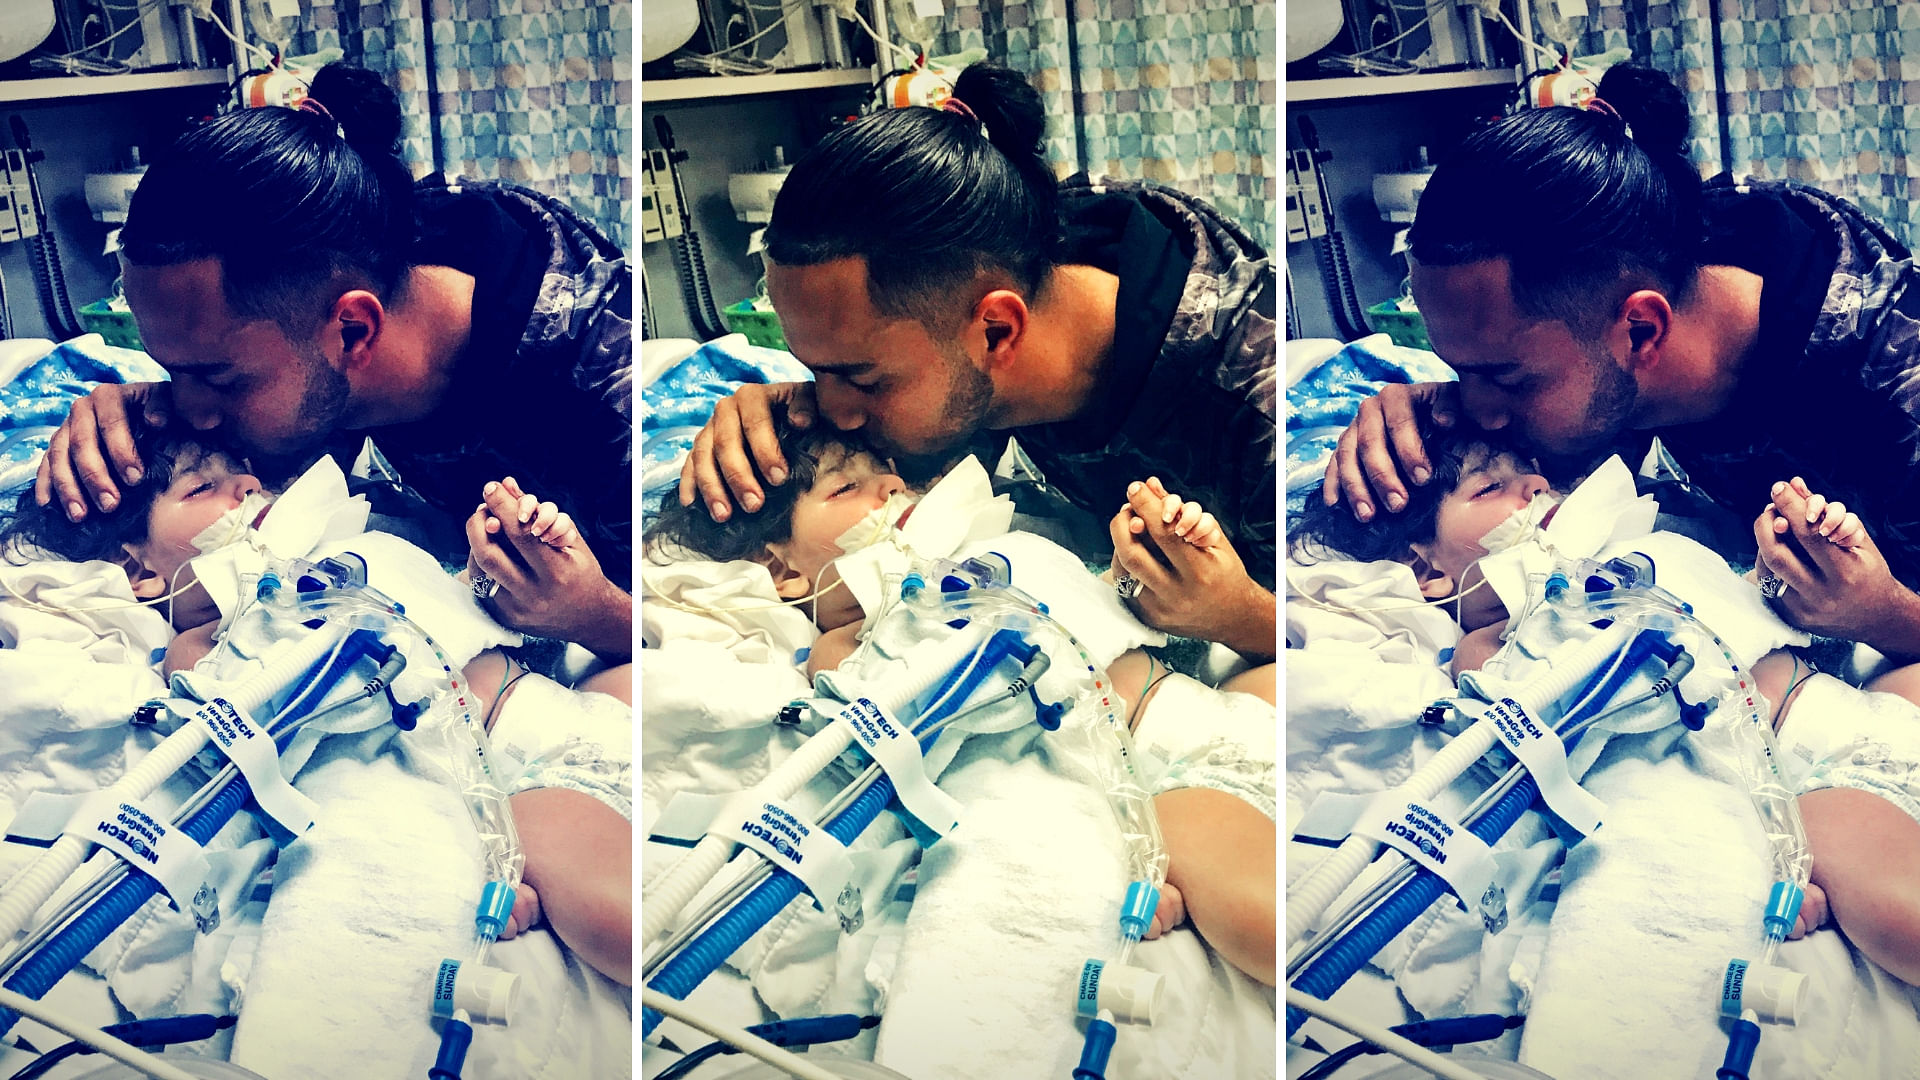 Ali Hassan, Shaima Swileh’s husband kisses his 2-year-old son, who is on life support.